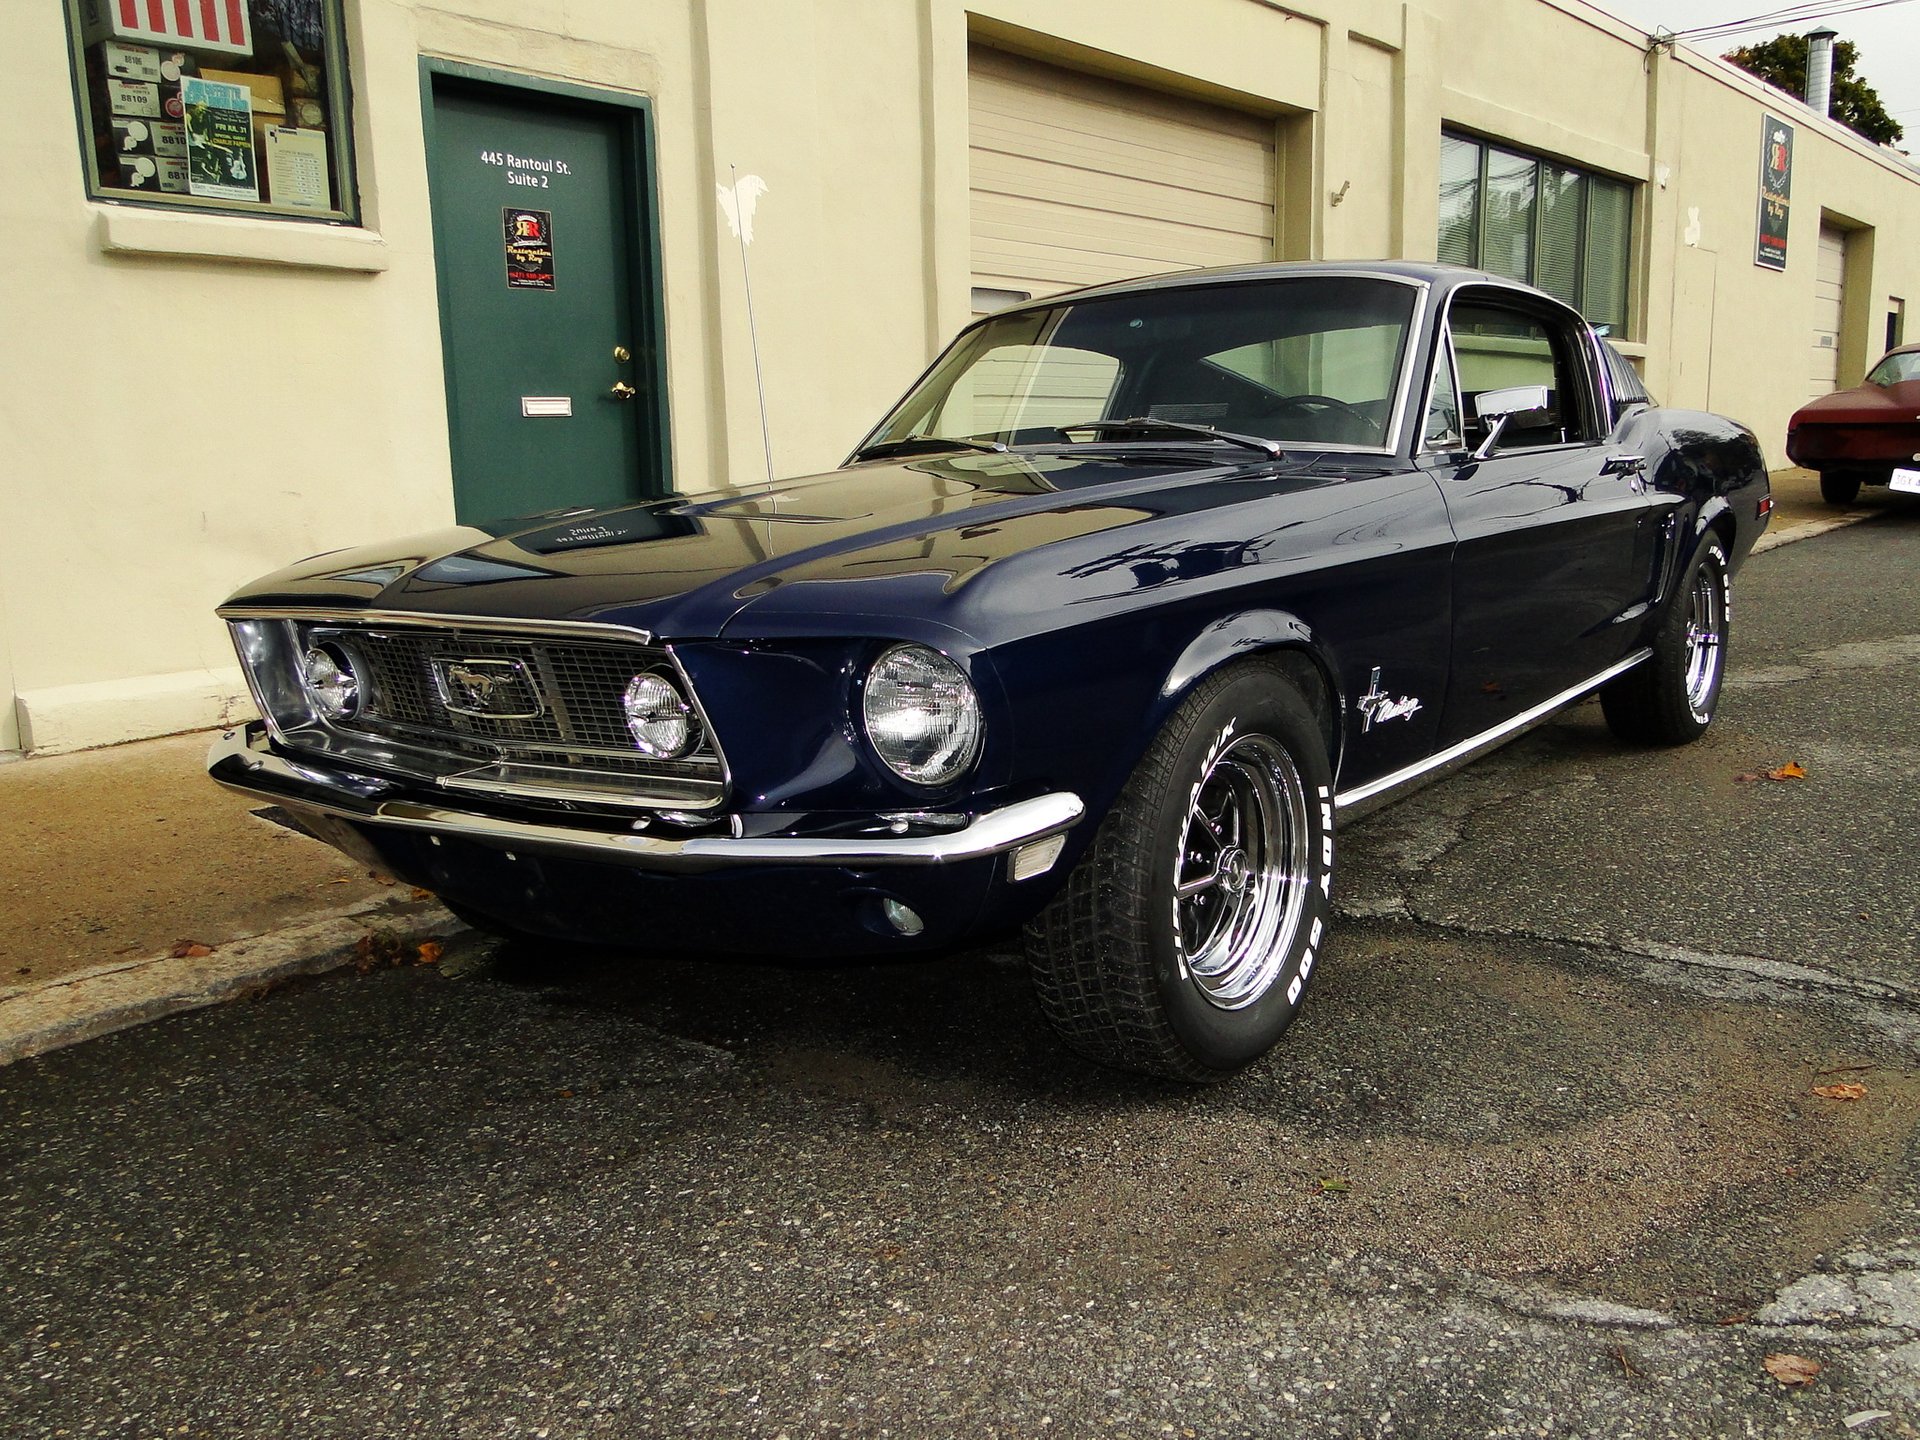 Mustang Fords Legendary Muscle Car